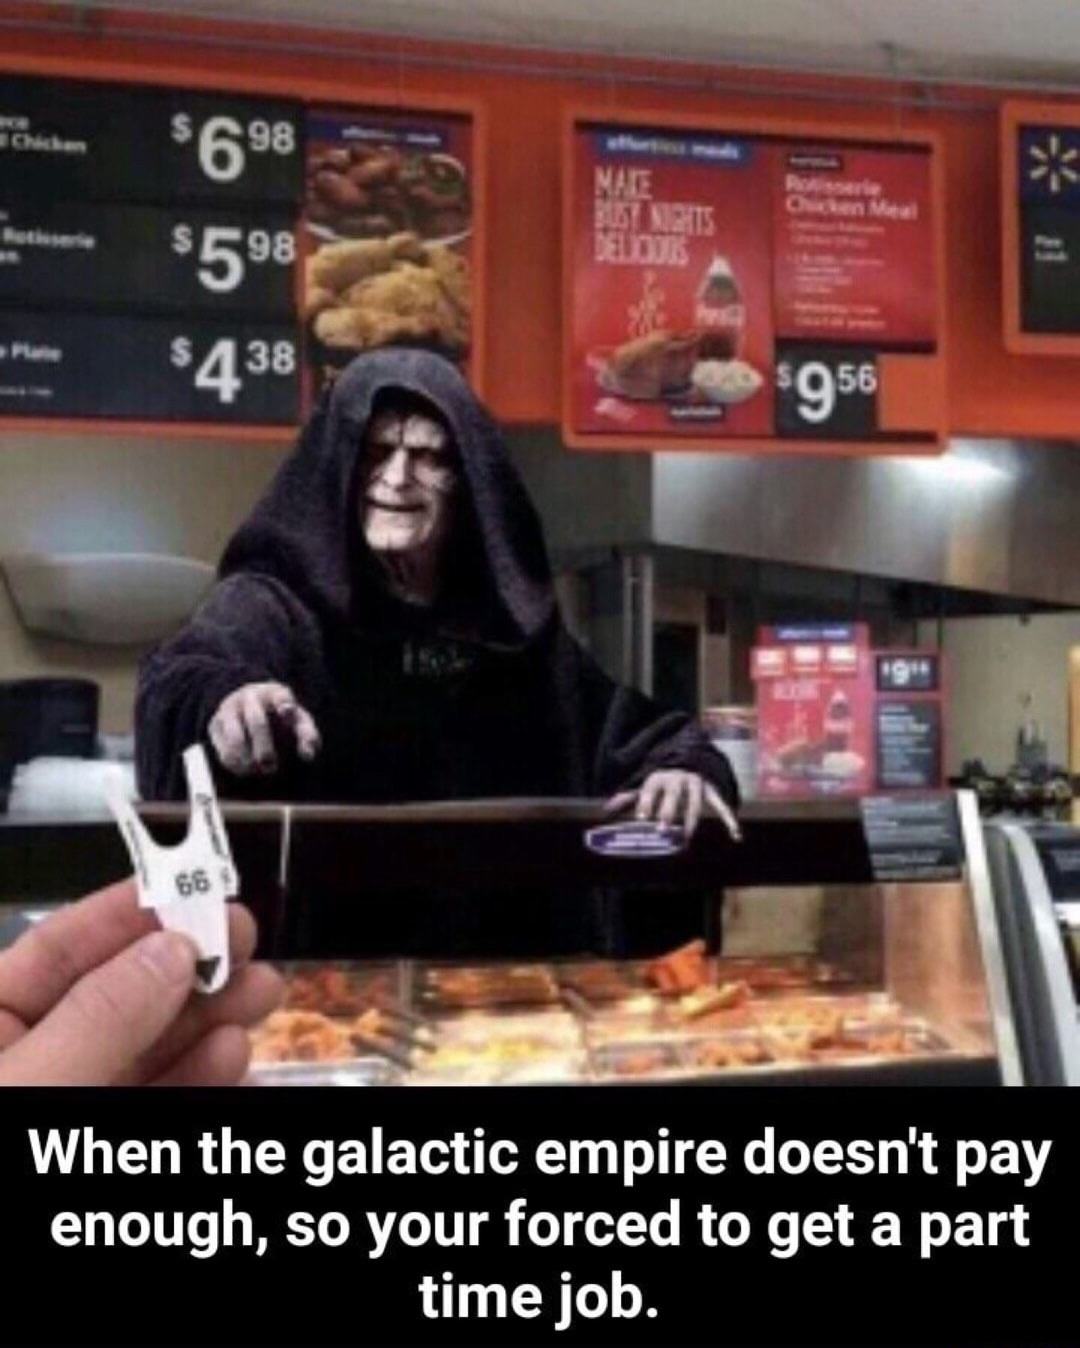 Rotisserie chicken - montre 598 Del Mon 8438 $956 When the galactic empire doesn't pay enough, so your forced to get a part time job.